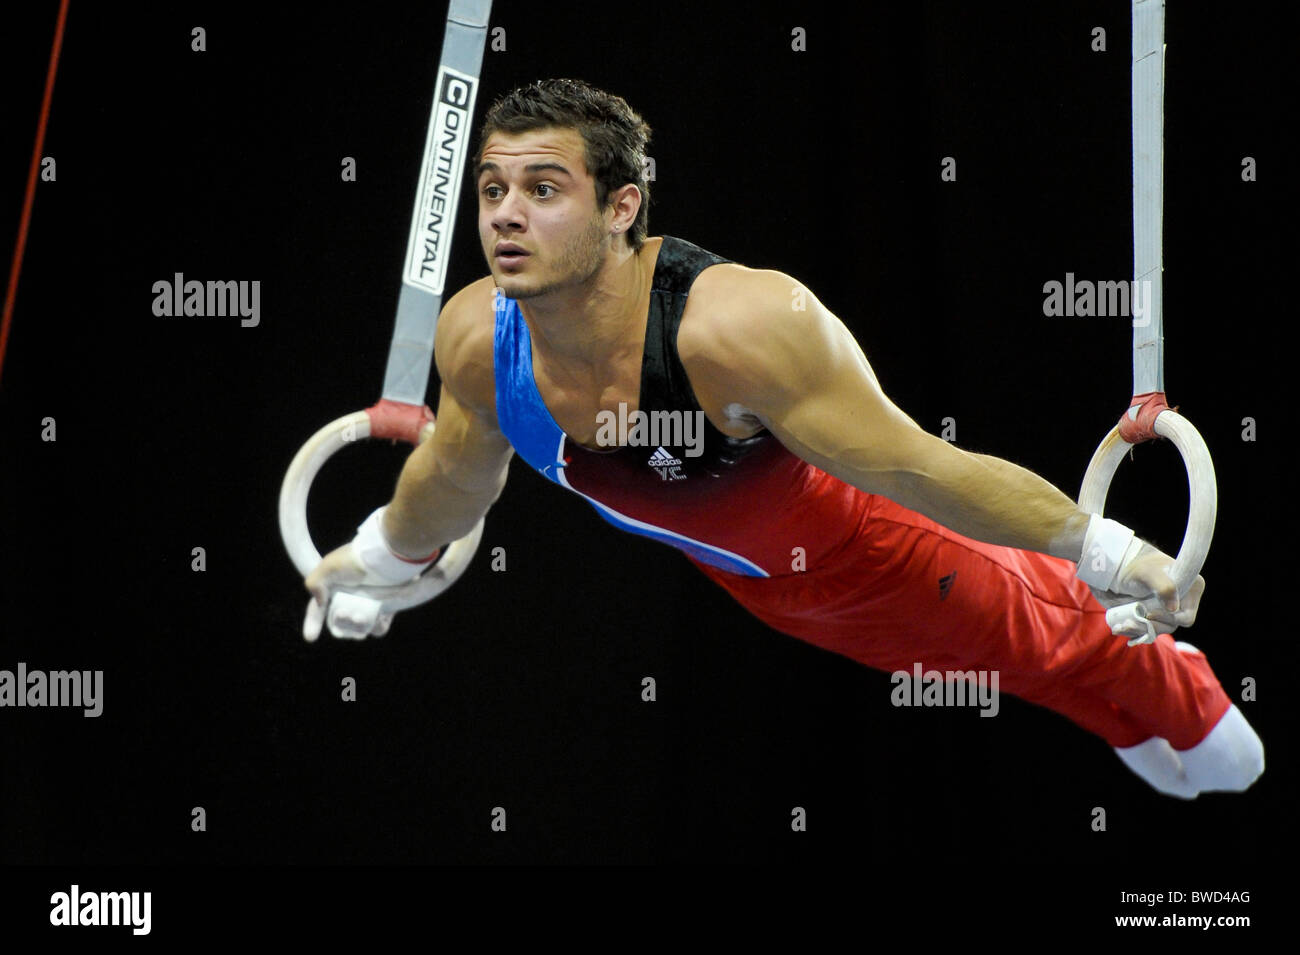 21.11.2010 Gymnastics Grand Prix from Glasgow.Ait Said of France on rings Stock Photo